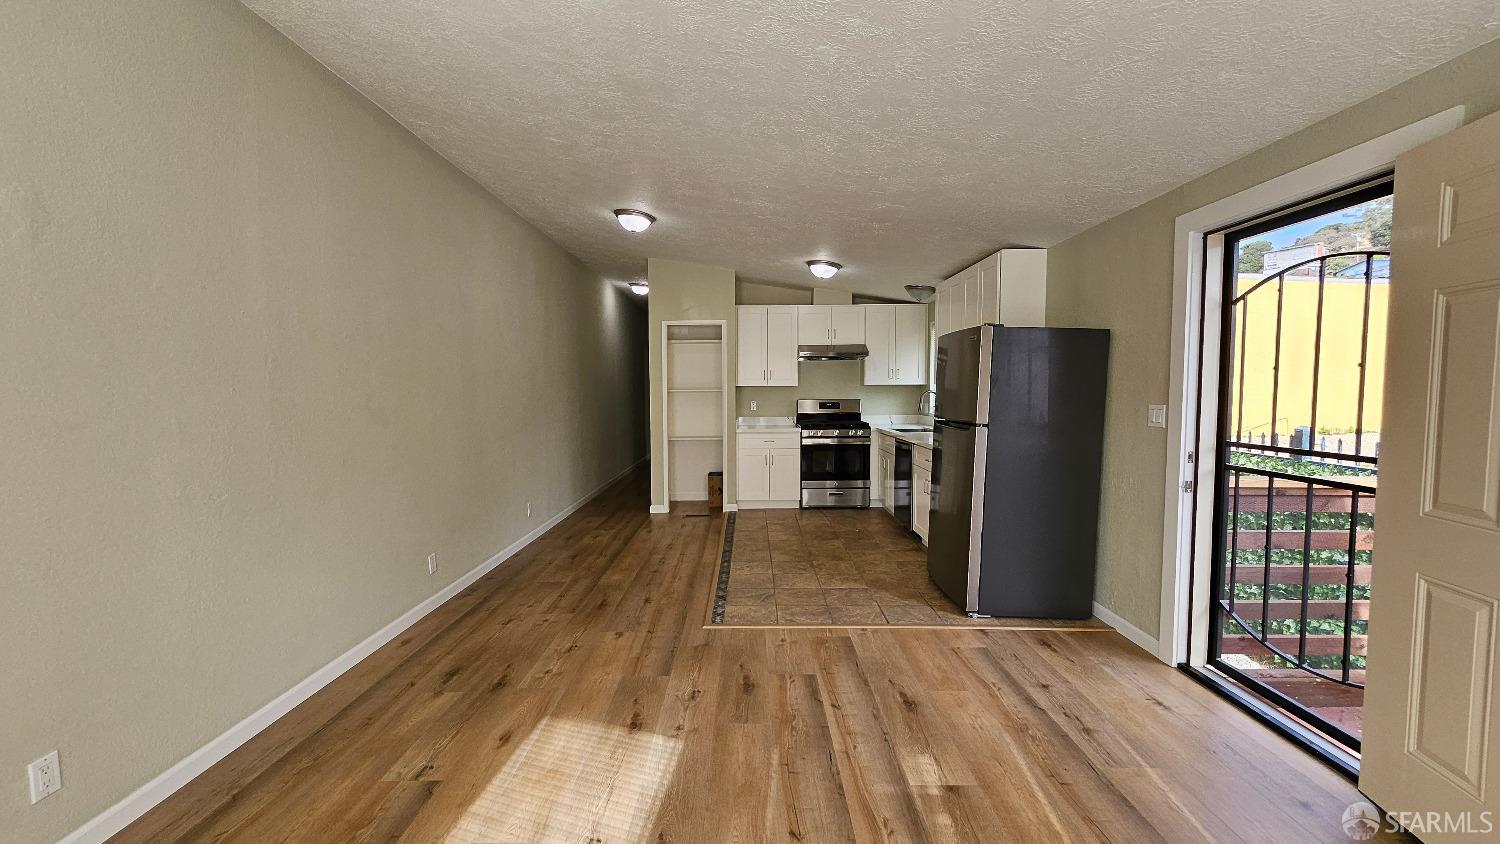 Photo of 2455 89th Ave in Oakland, CA